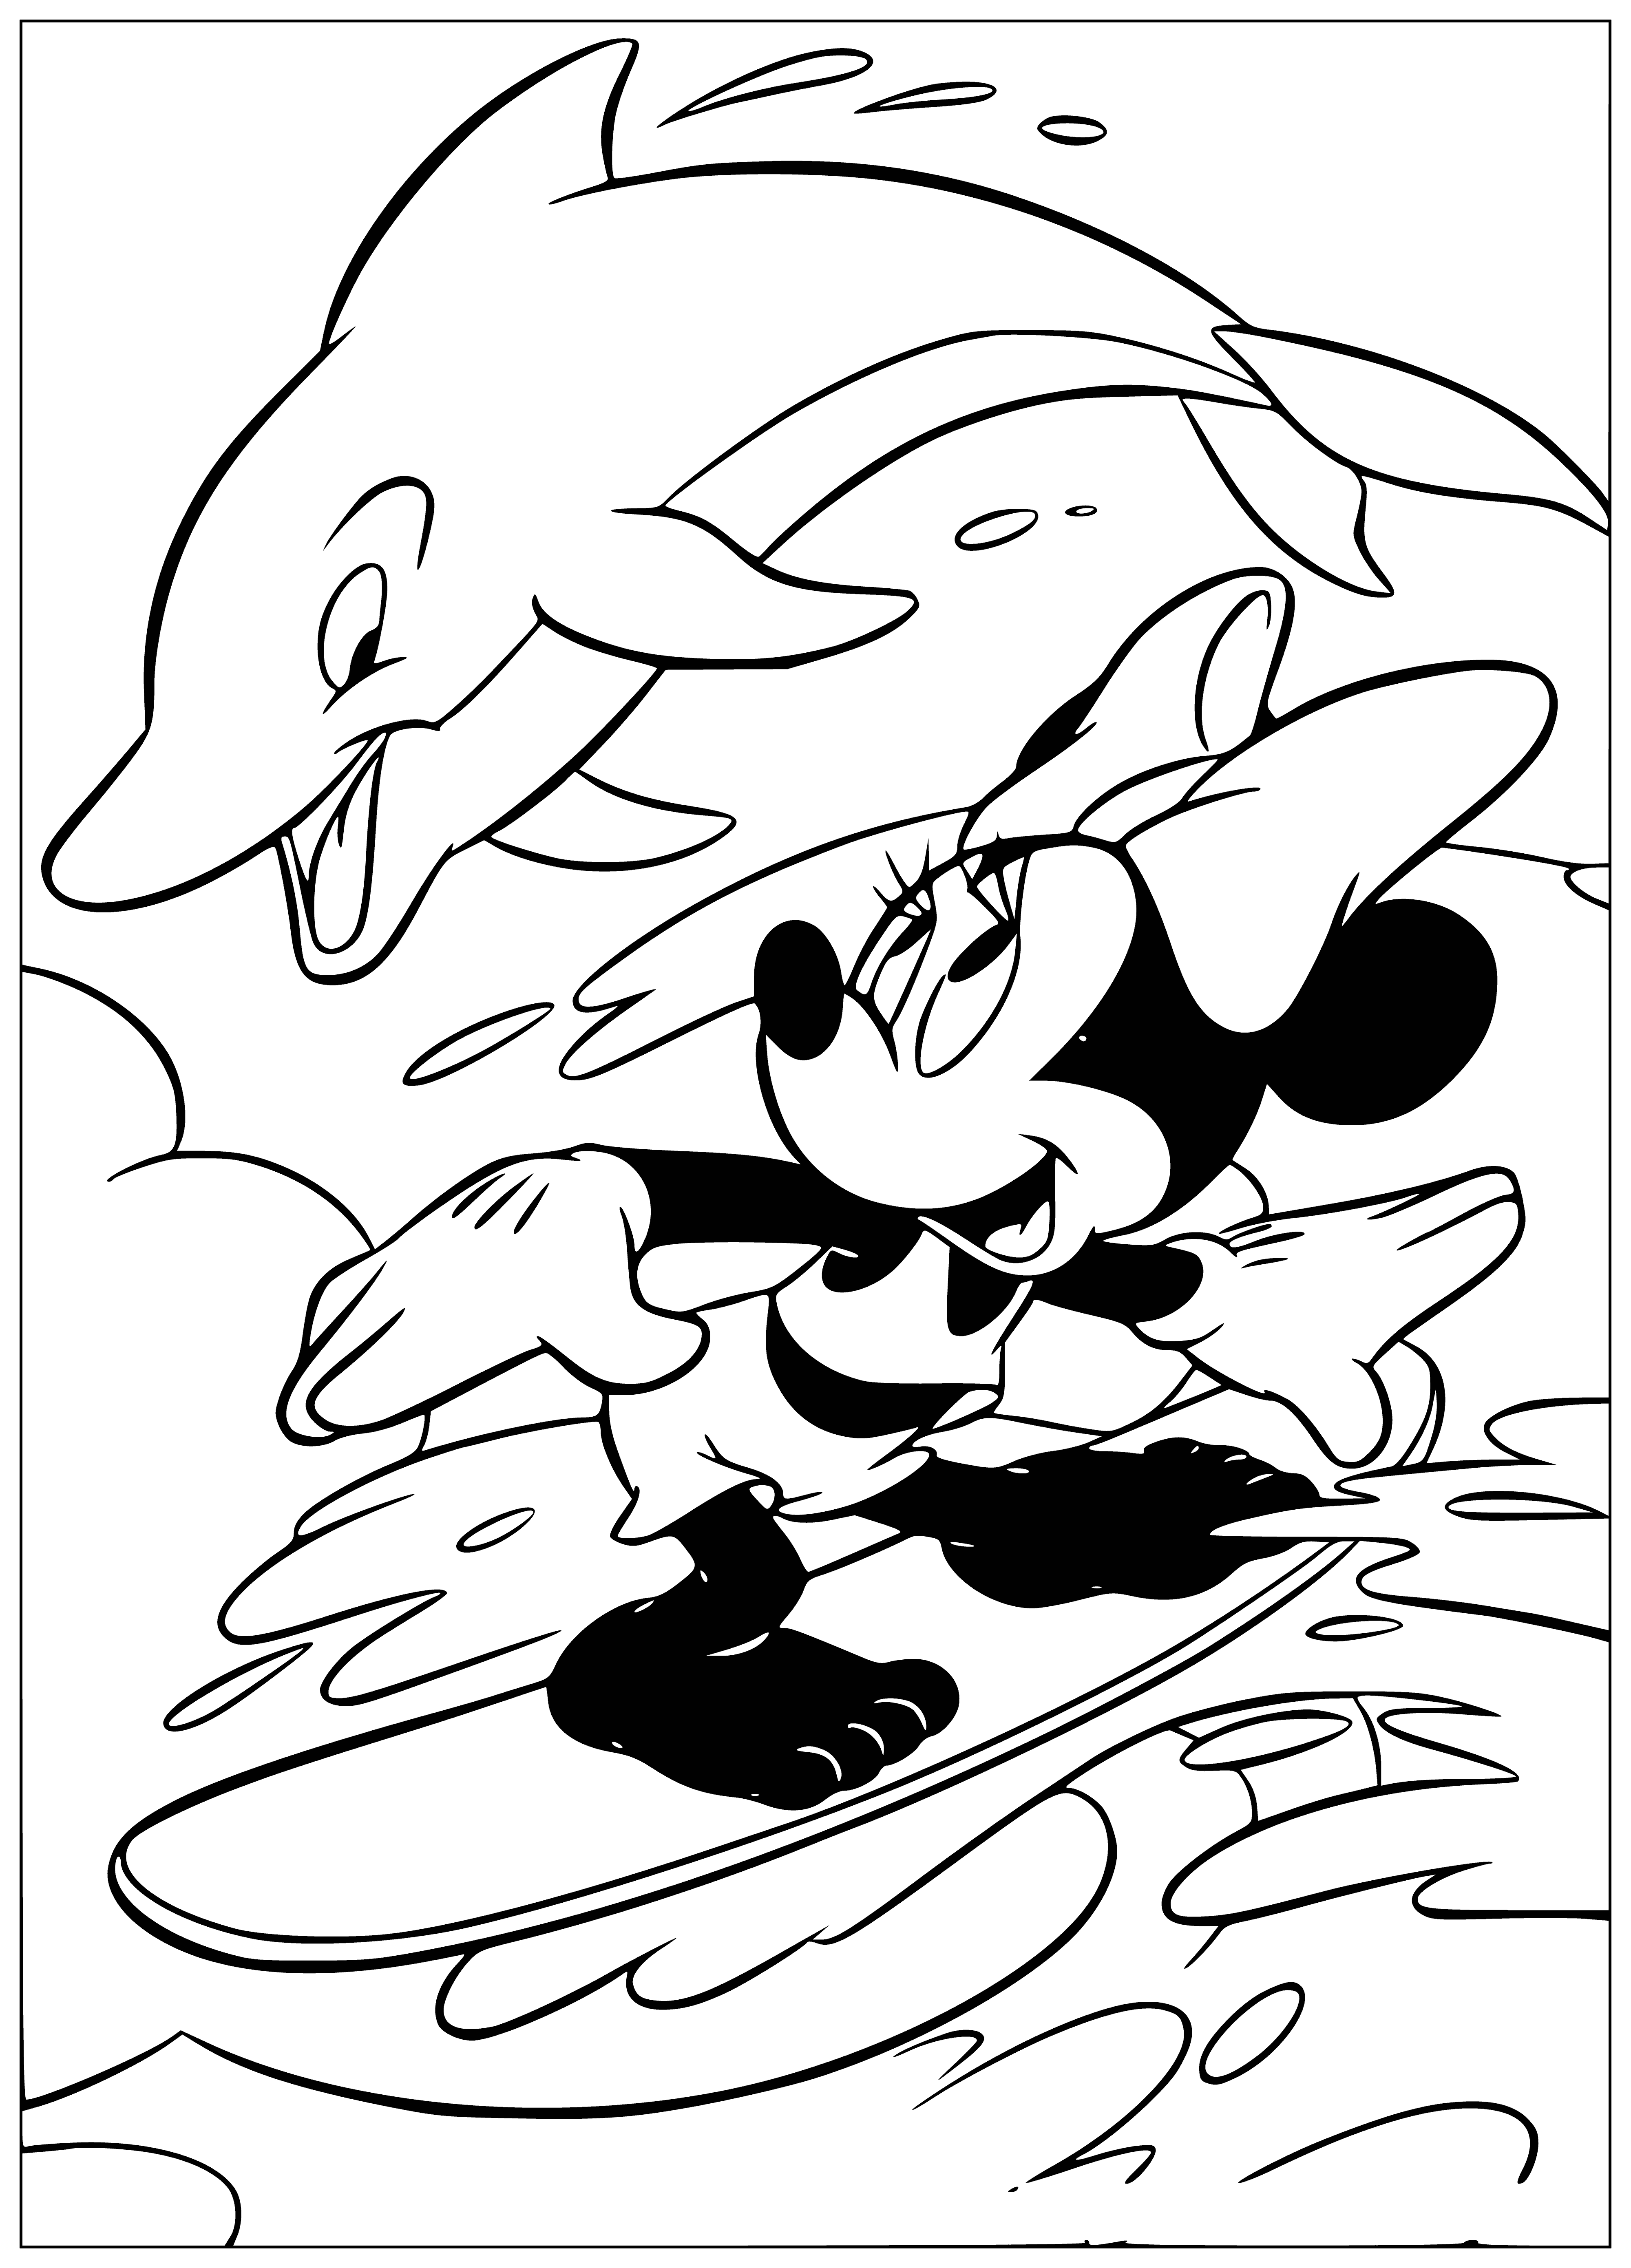 Surfing coloring page